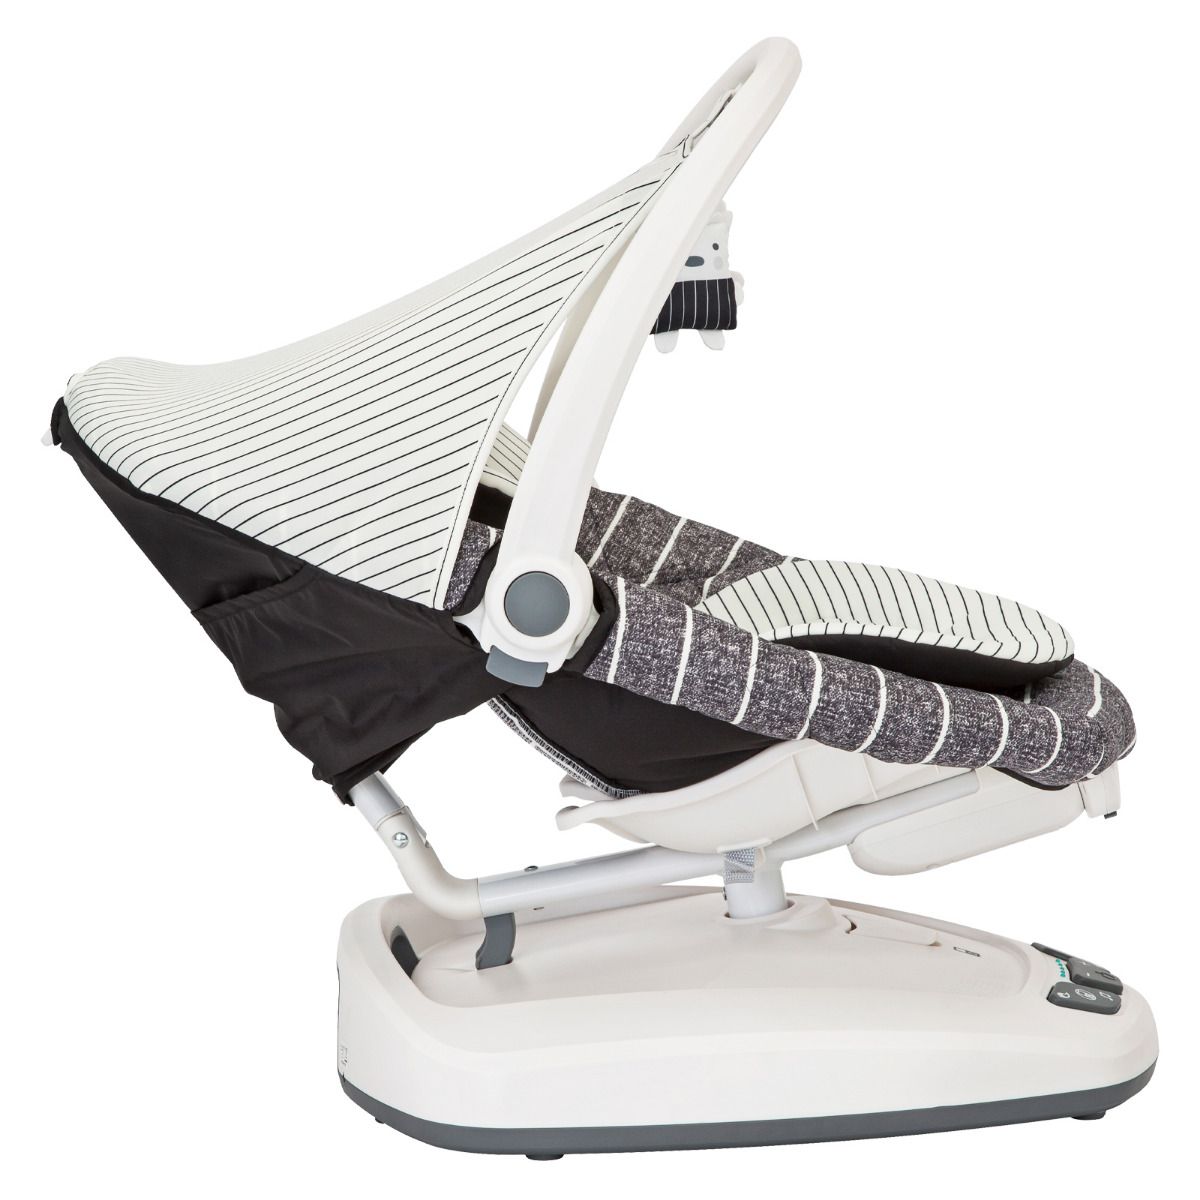 Graco Move with me Canopy Babyschaukel